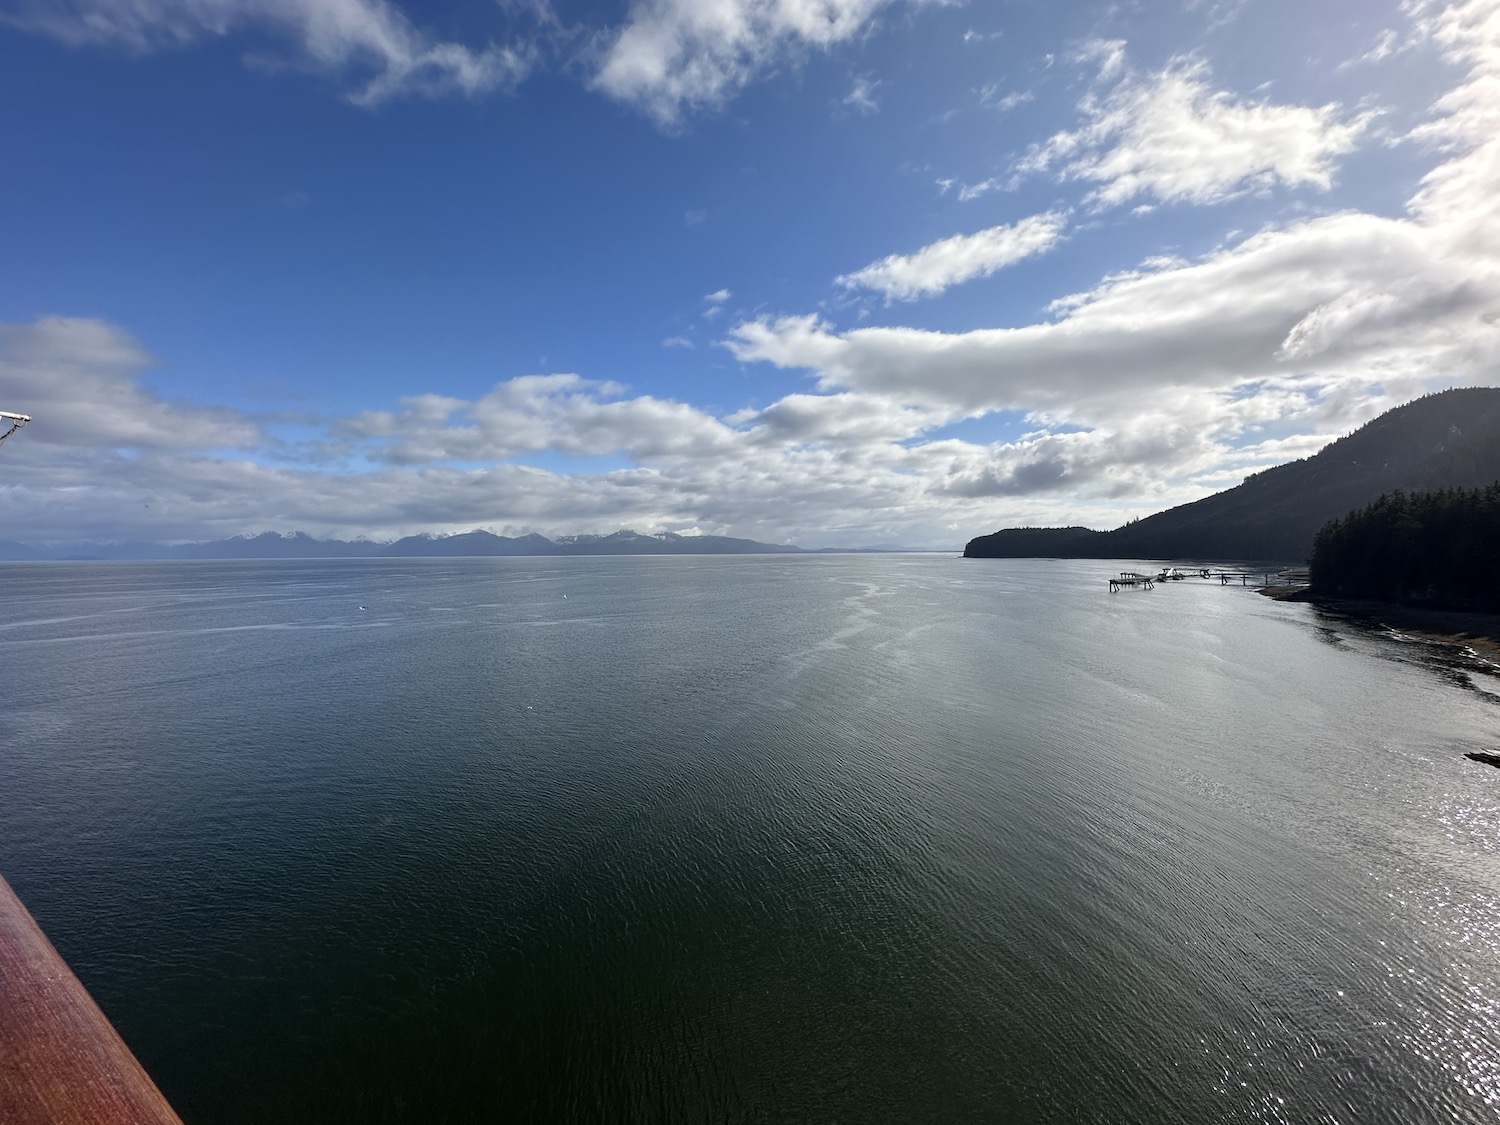 Seeing the gorgeous view of Icy Strait Point from the deck of the ship.